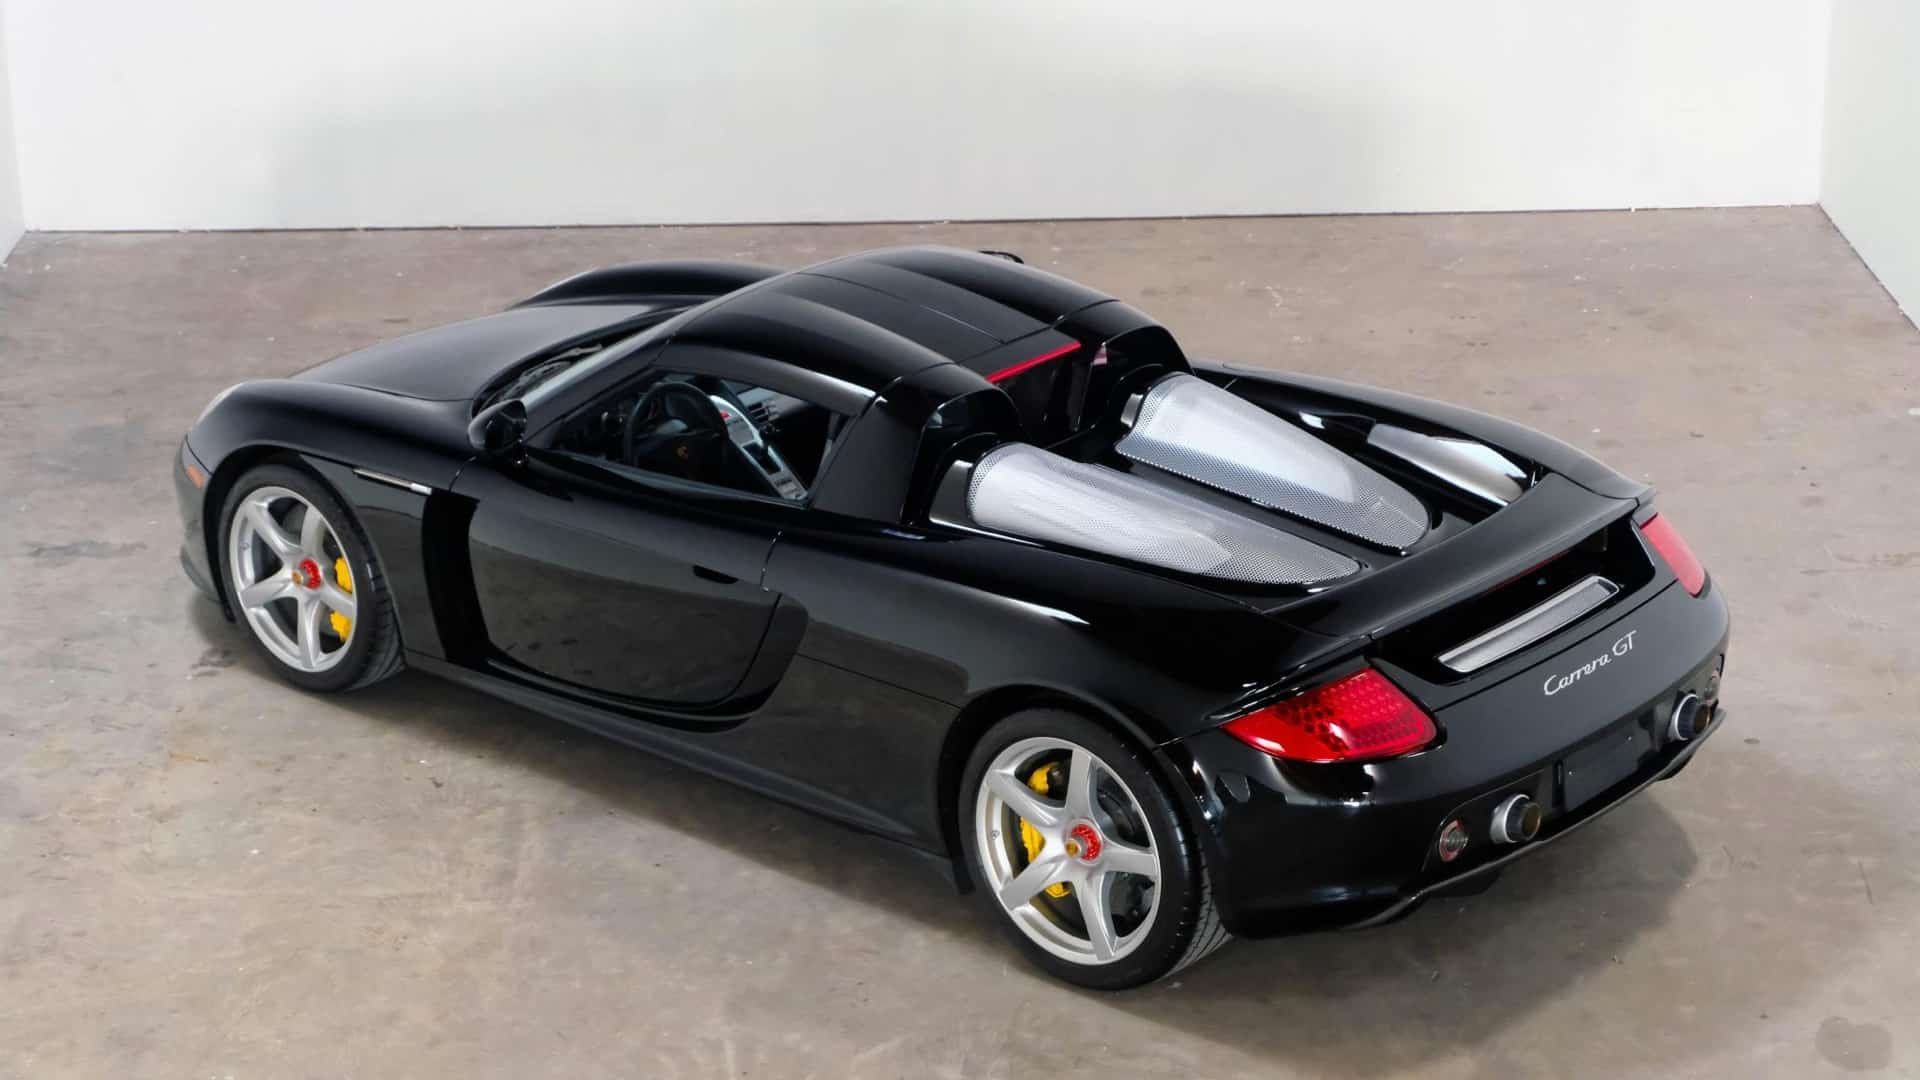 2004-porsche-carrera-gt-once-owned-by-jerry-seinfeld-photo-via-bring-a-trailer_100830924_h-min.jpg